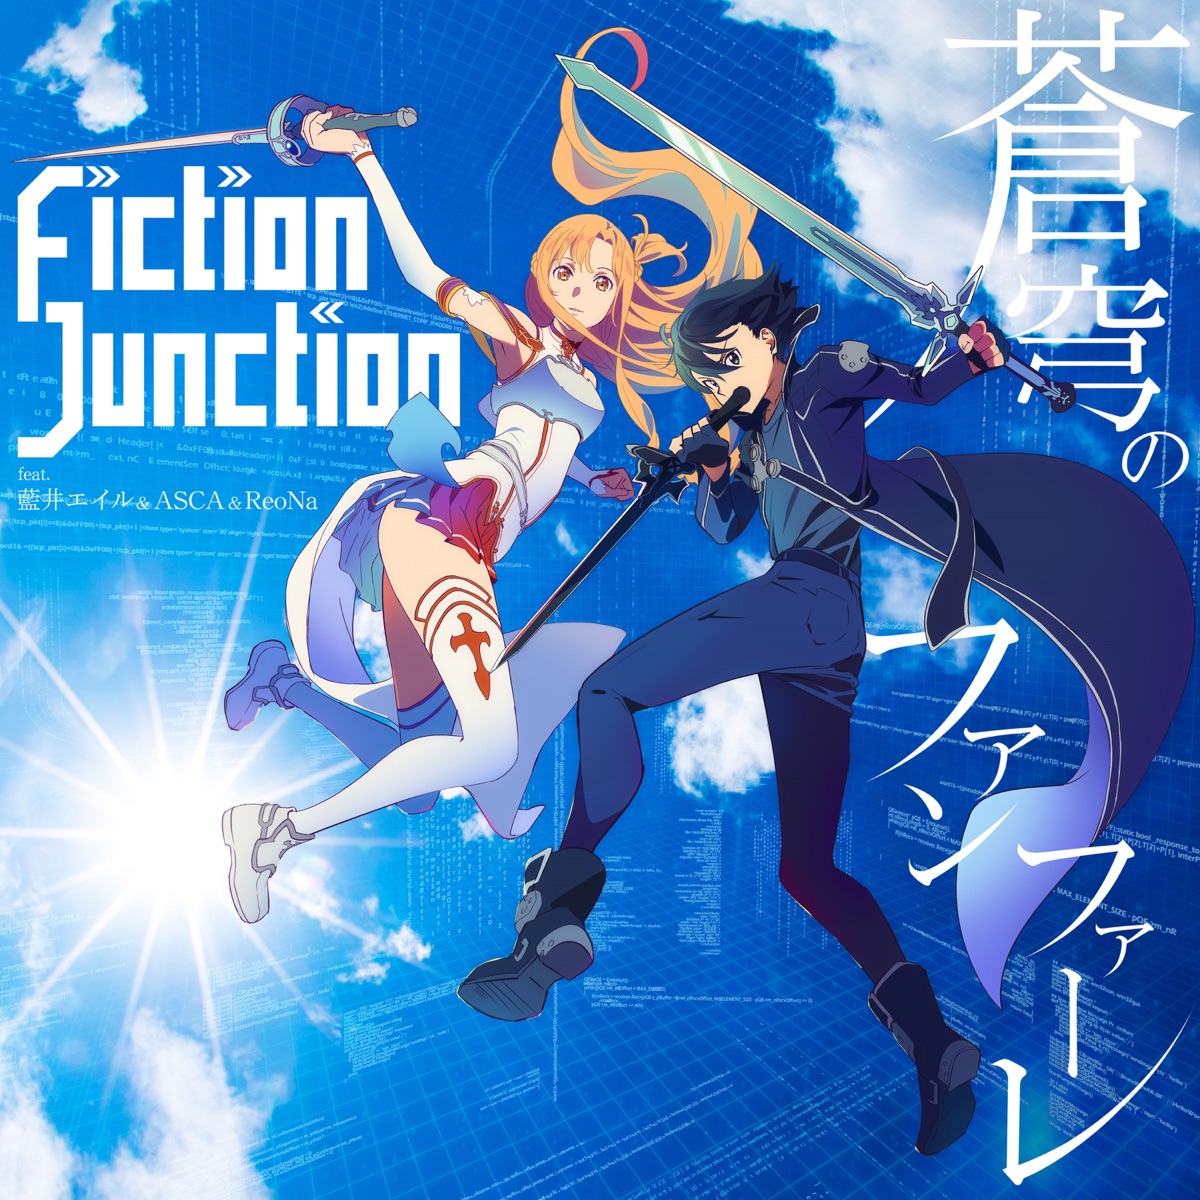 Cover art for『FictionJunction feat. Eir Aoi & ASCA & ReoNa - Soukyuu no Fanfare』from the release『Soukyuu no Fanfare』